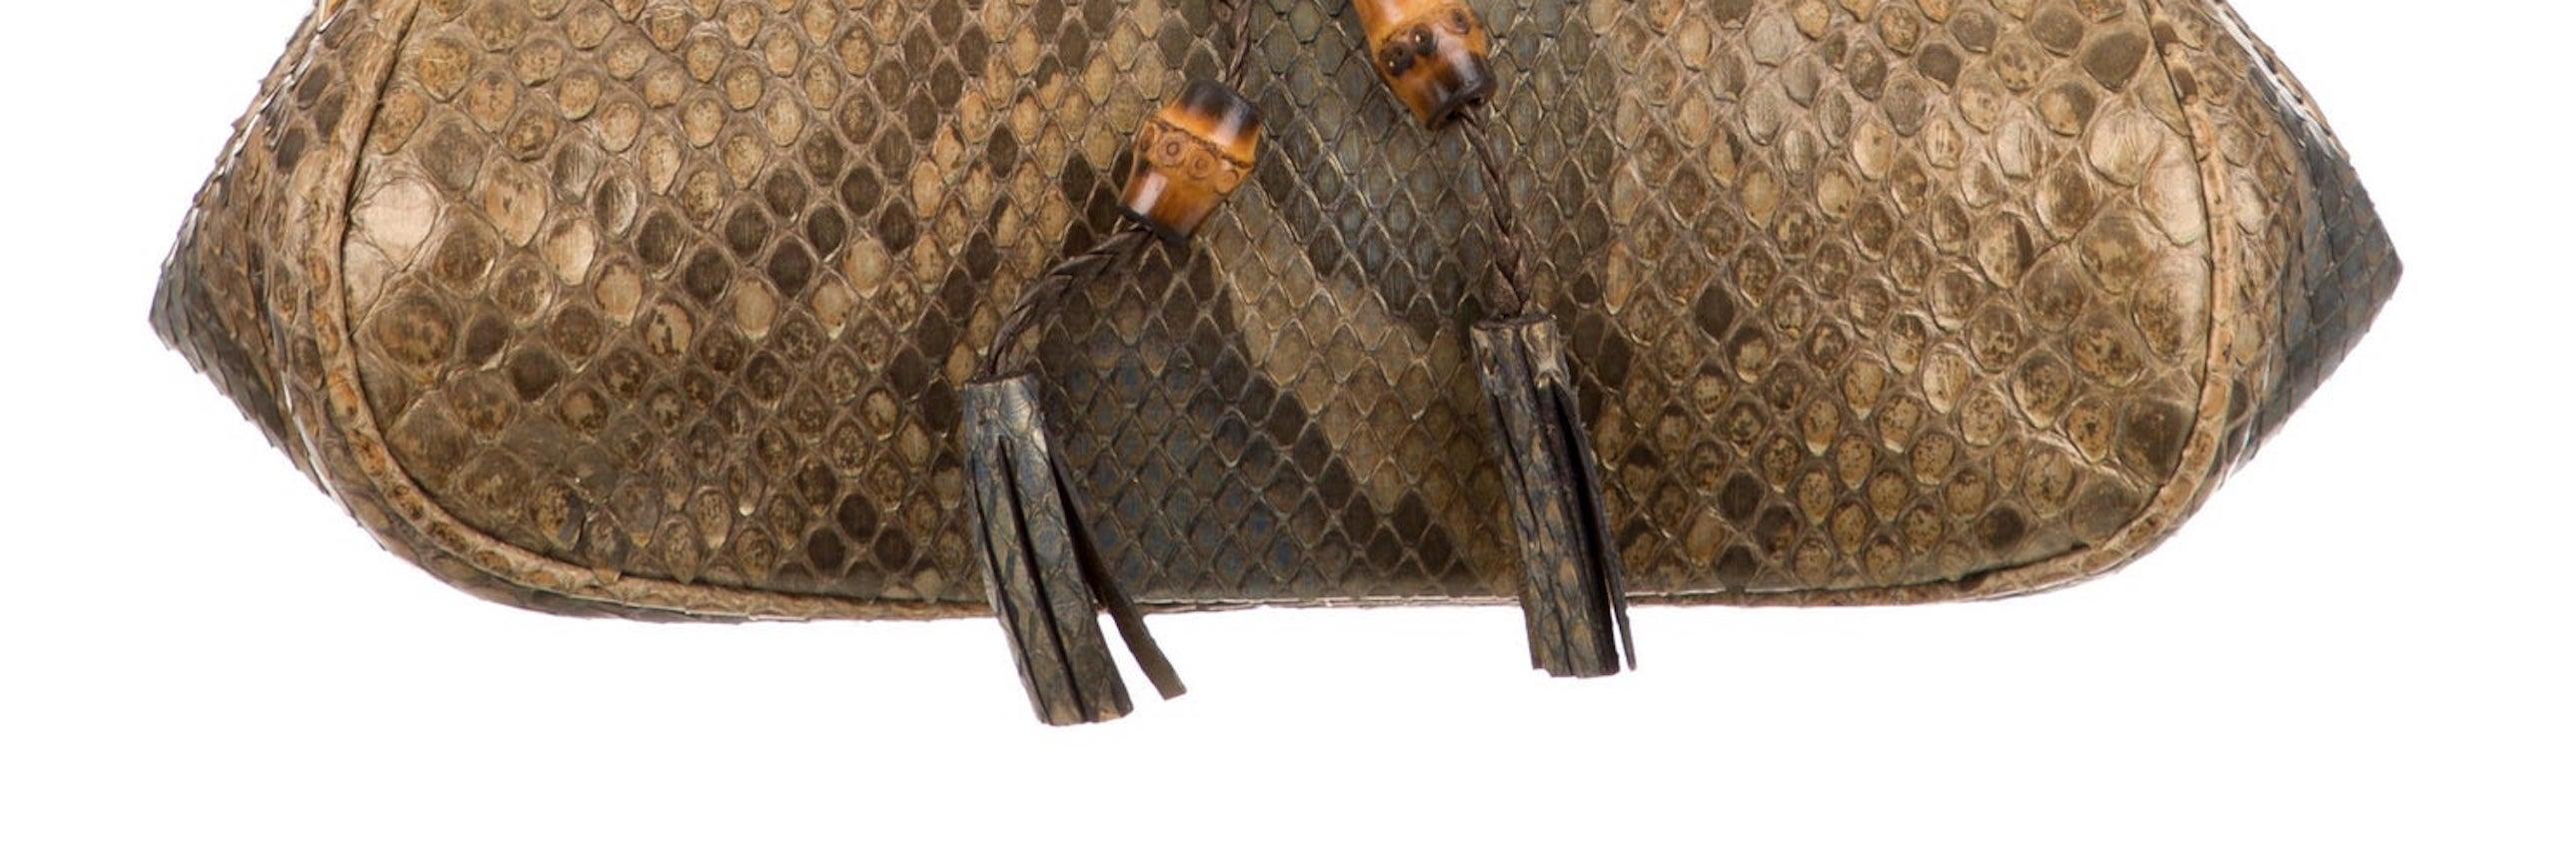 
Snakeskin
Bamboo
Gold tone hardware
Leather lining
Turnlock closure
Made in Italy
Measures 7.5